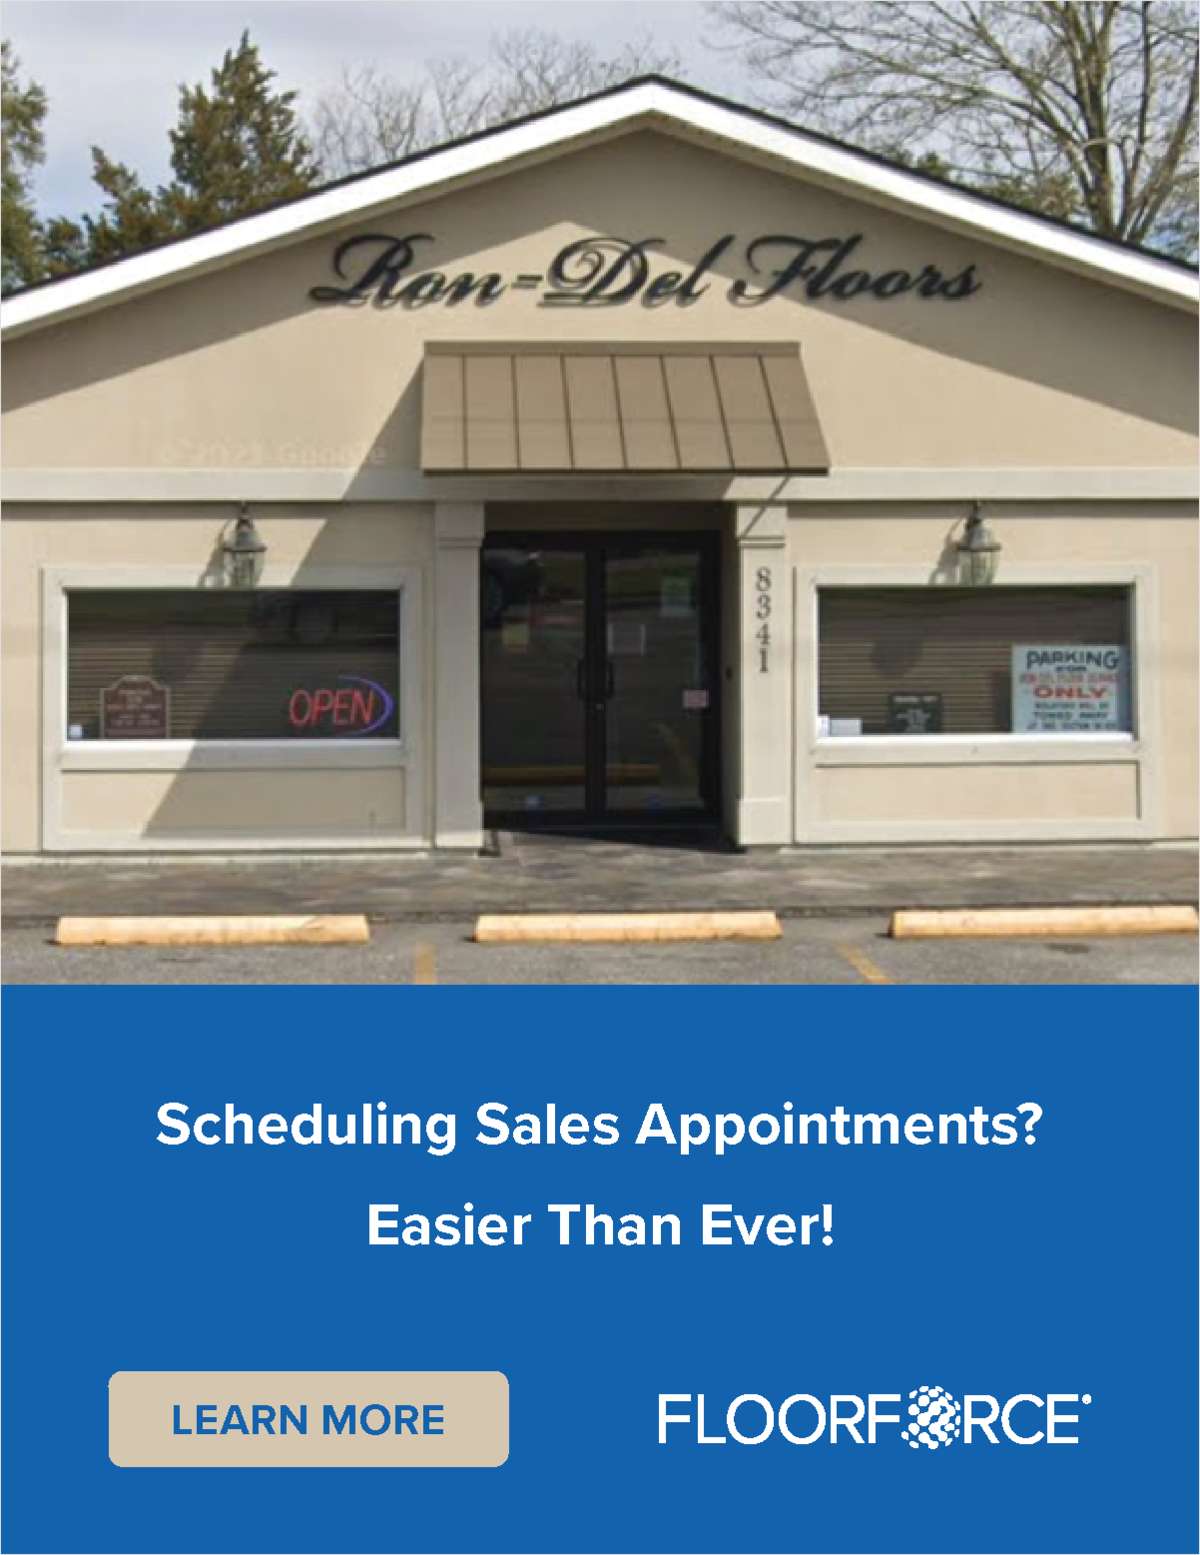 Hear a testimonial from a top client - Ron-Del Floor Service's - Mark Steele